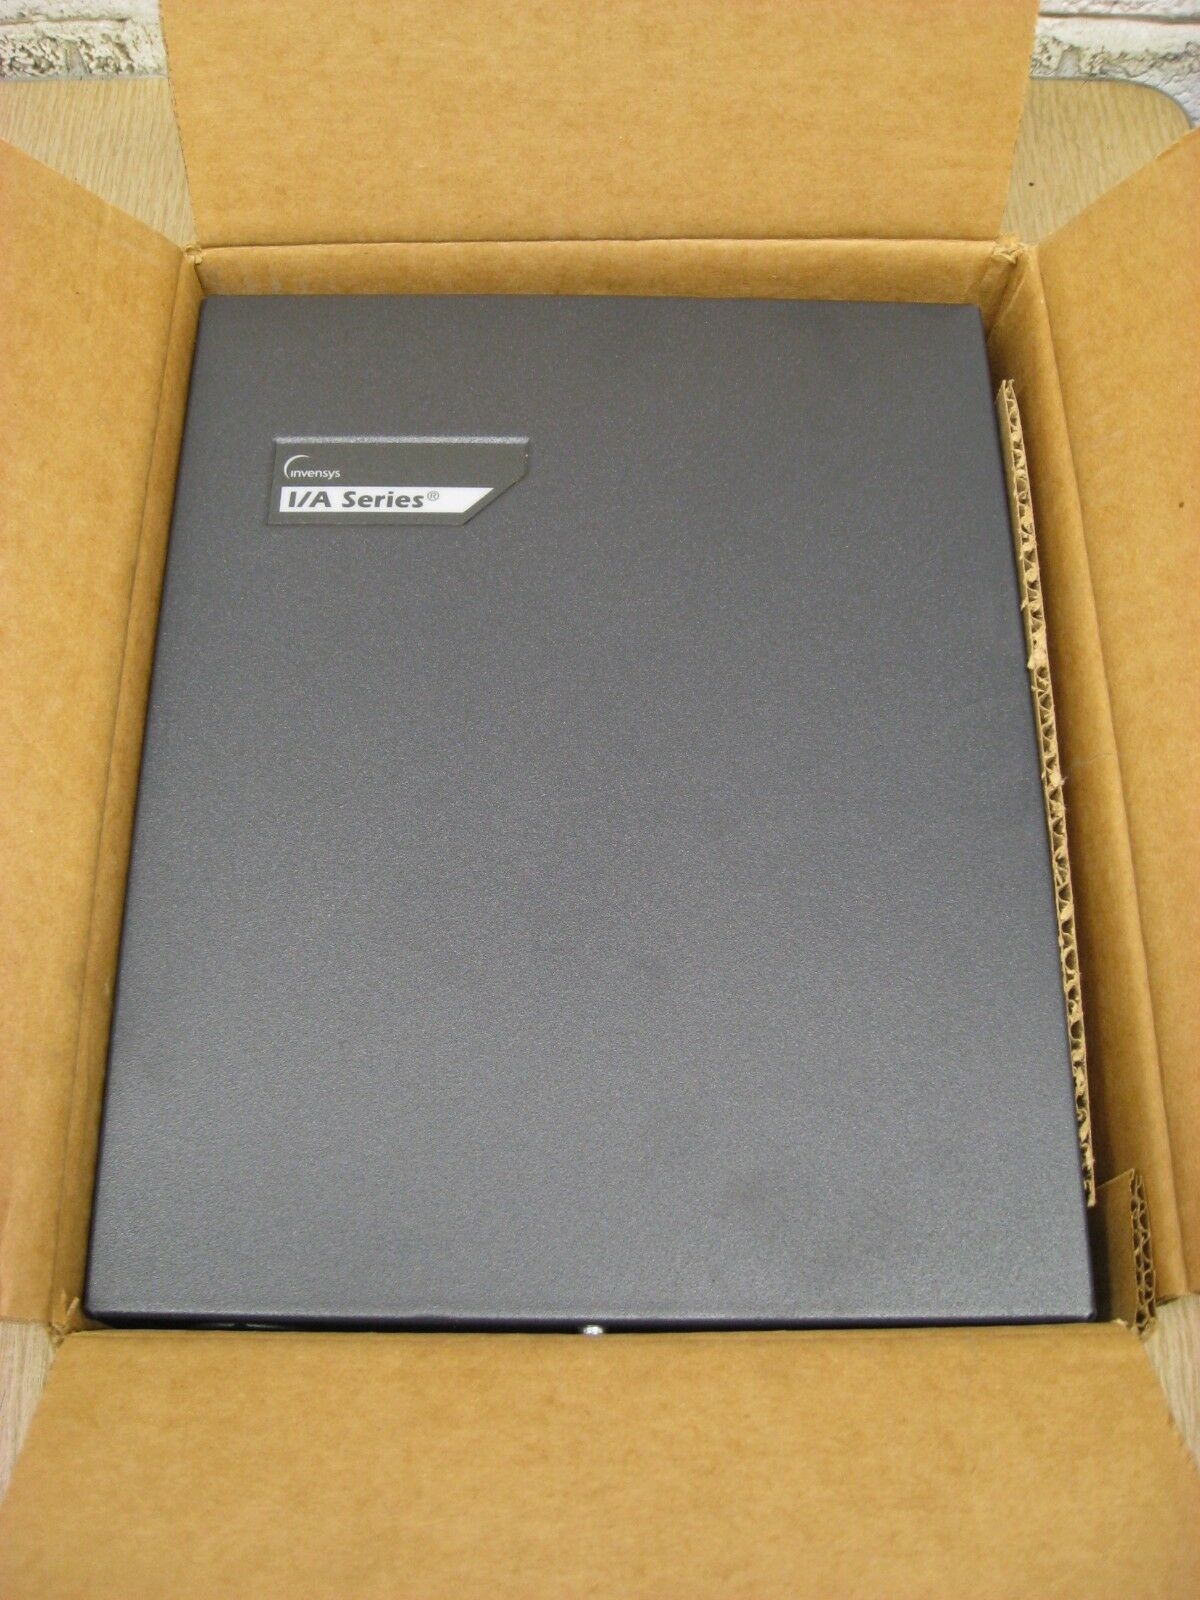 New Invensys ENCL-MZ800-WAL I/A MicroNet MN800 Controller Wall Mount Enclosure